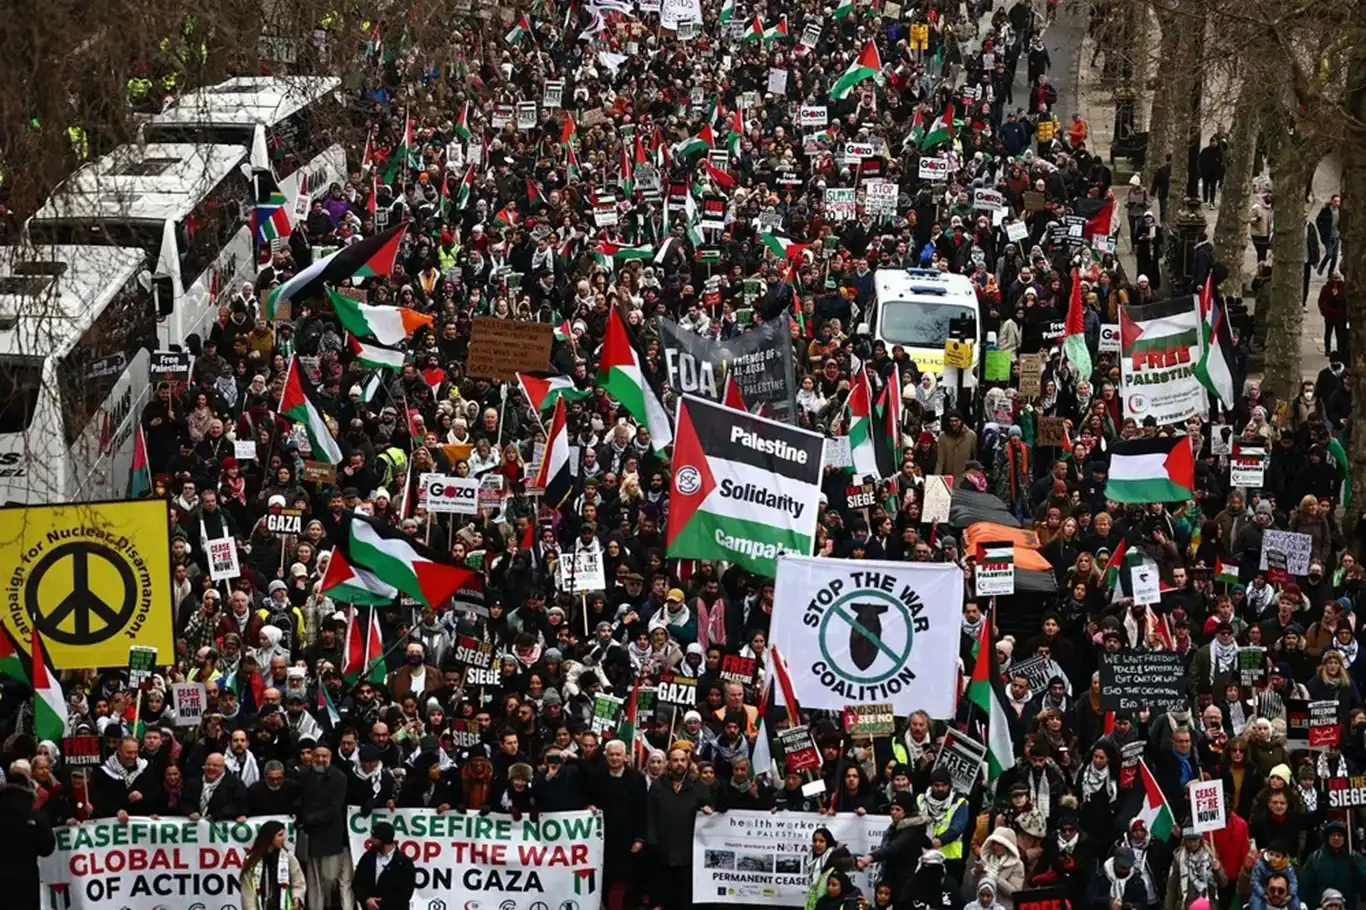 Thousands gather in London to protest israeli genocide, call for Gaza cease-fire